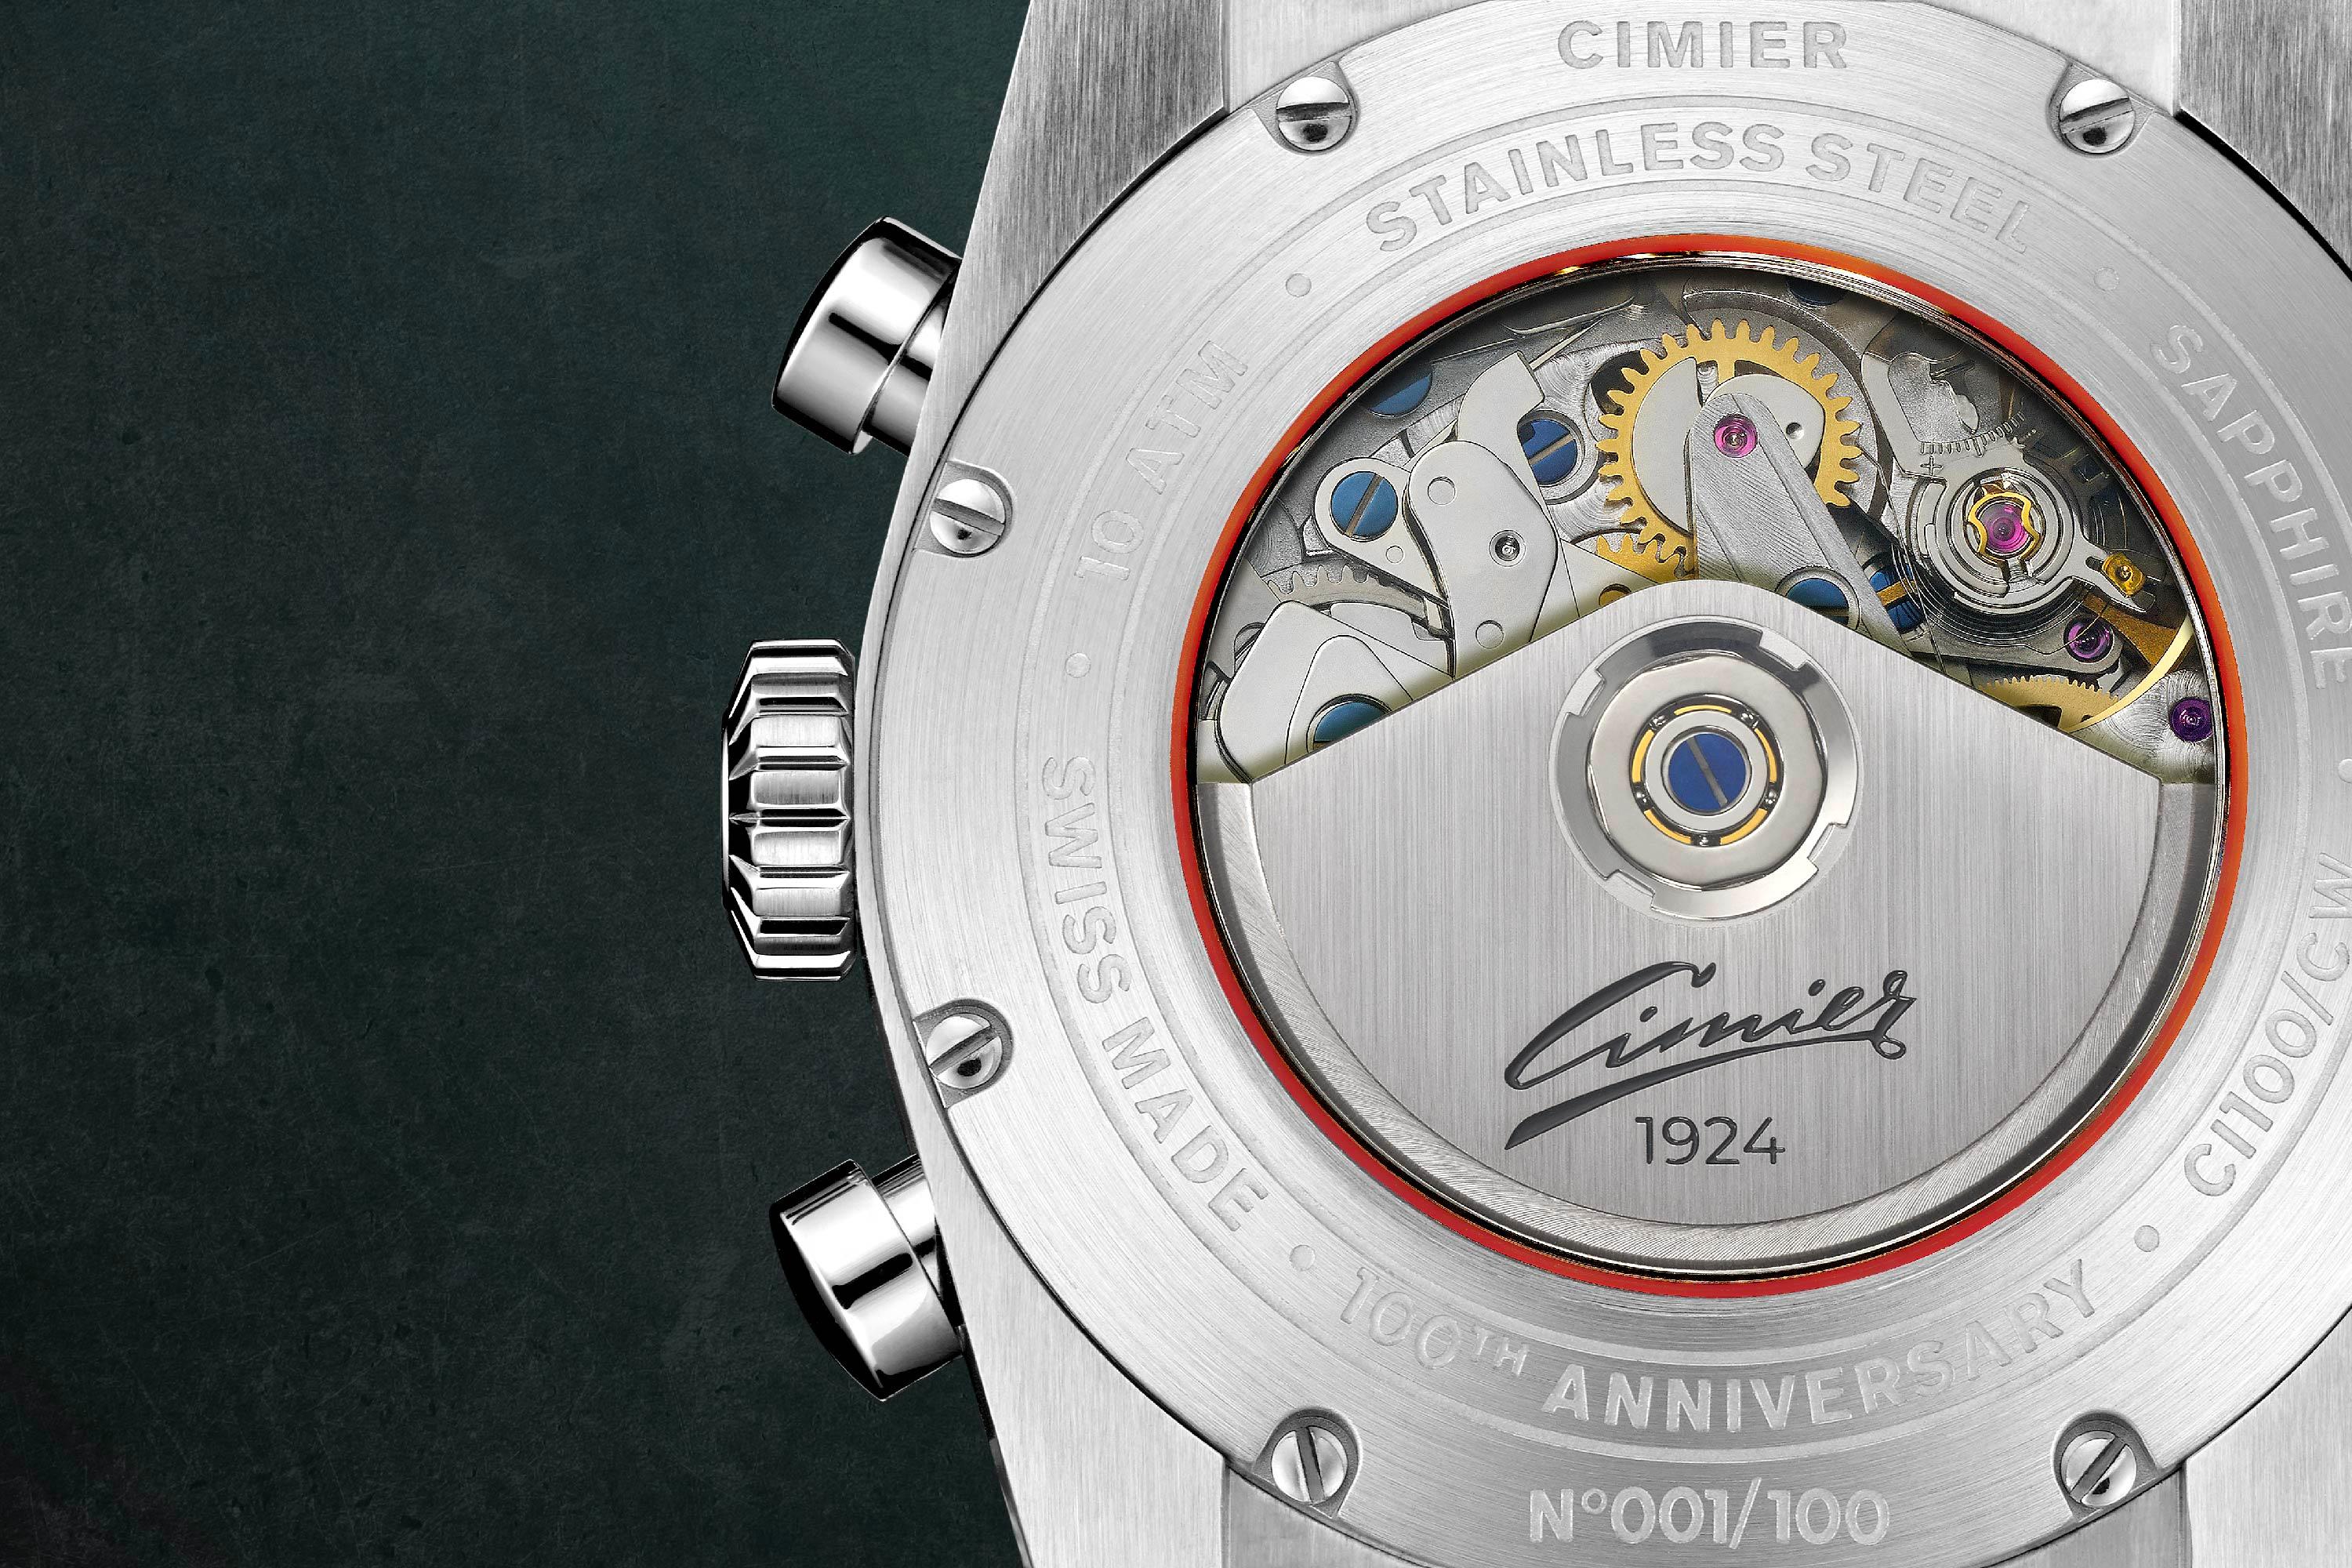 Back of Cimier wristwatch with movement visible